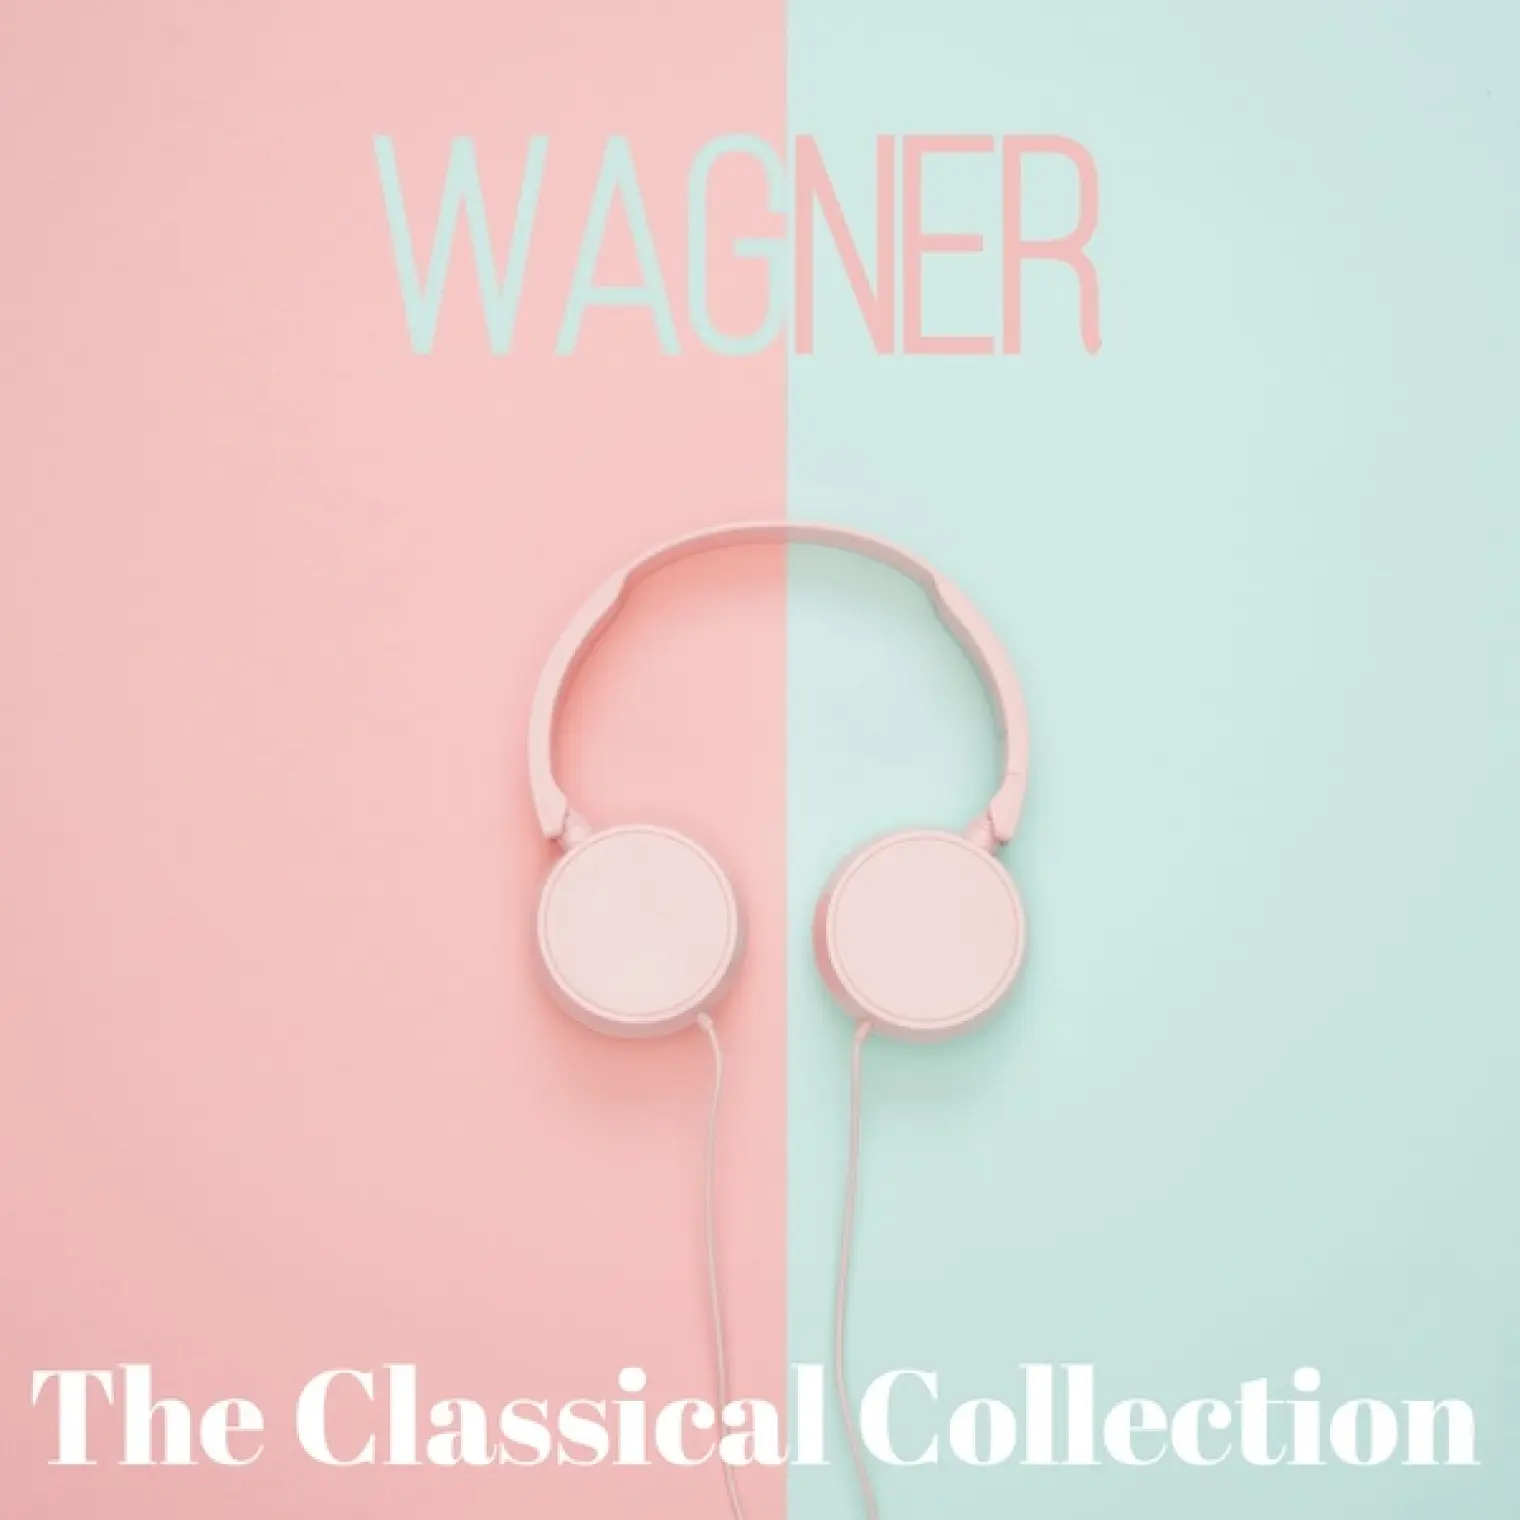 Wagner (The classical collection) -  Richard Wagner 